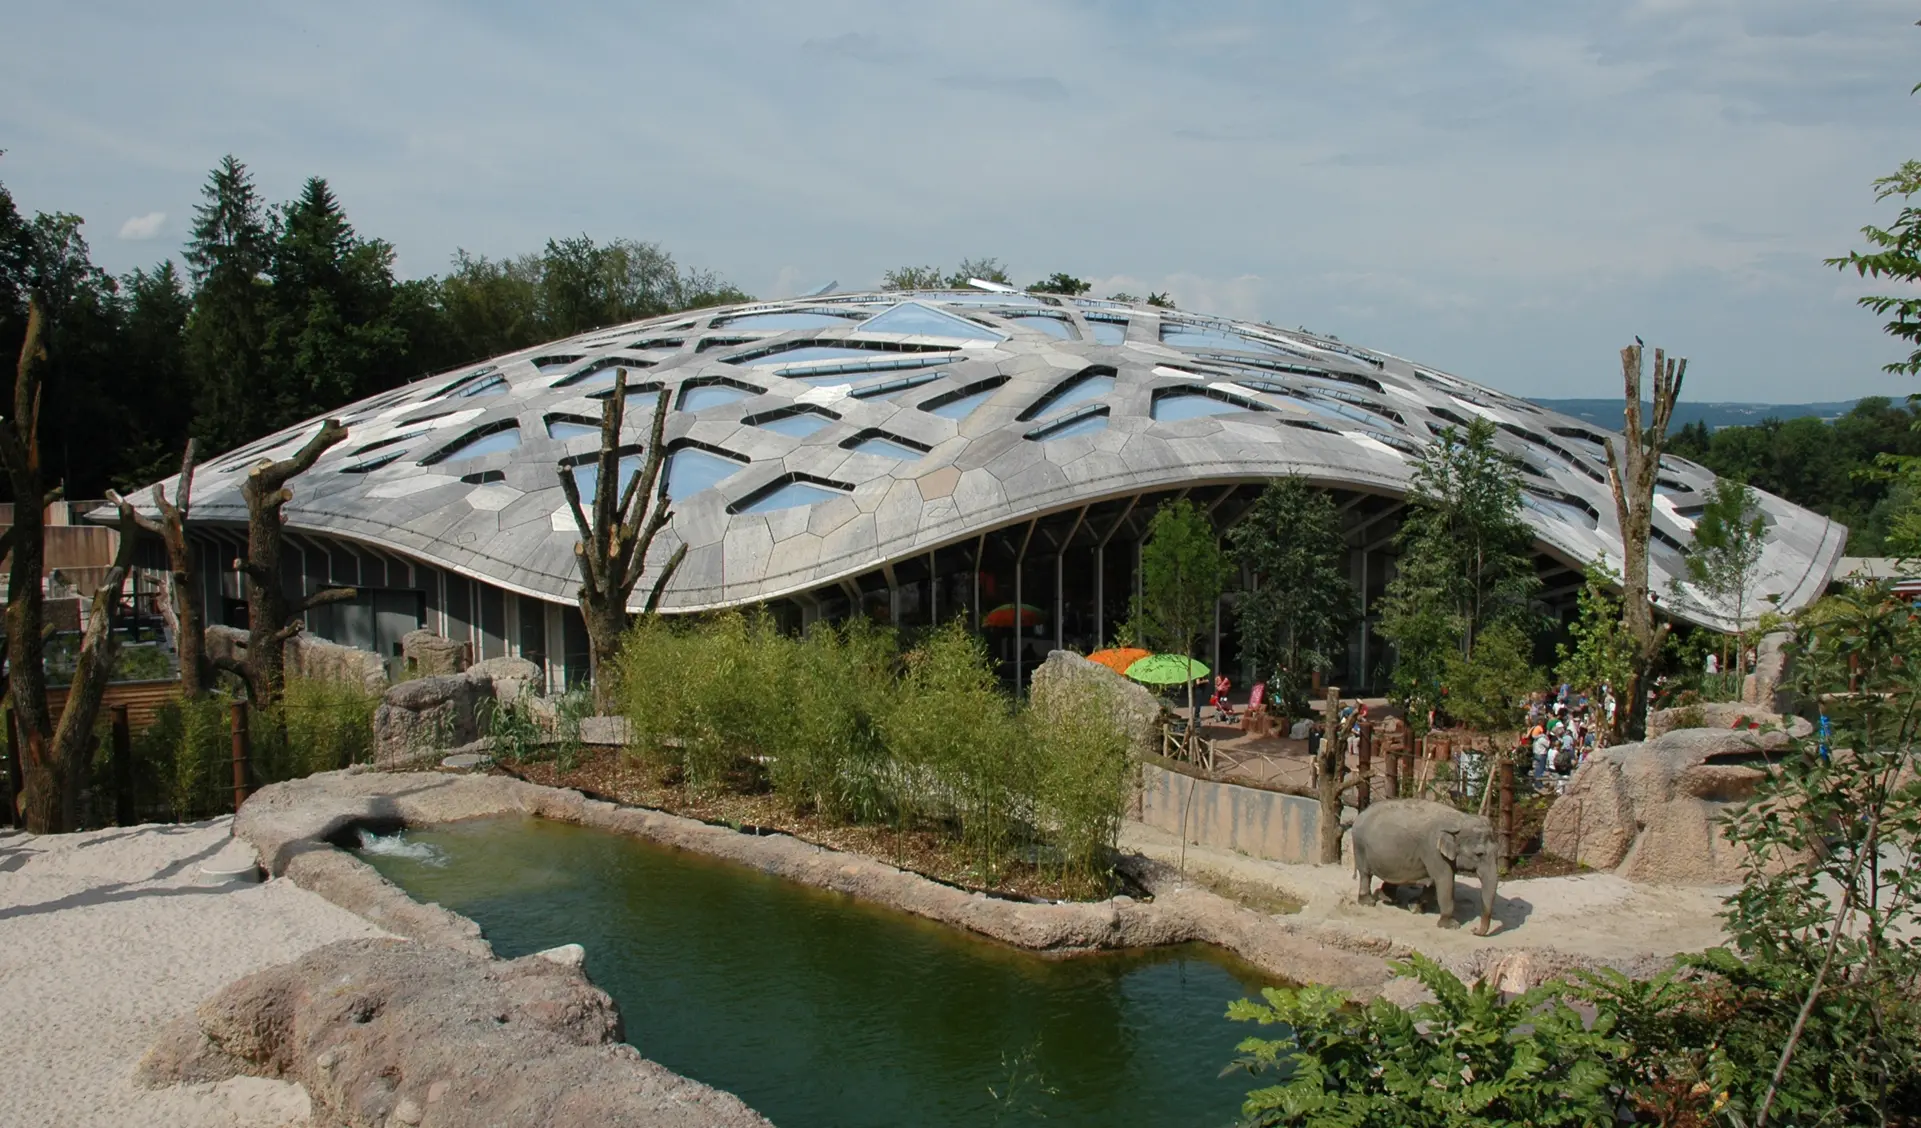 This picture shows the elephant house in the Zurich Zoo